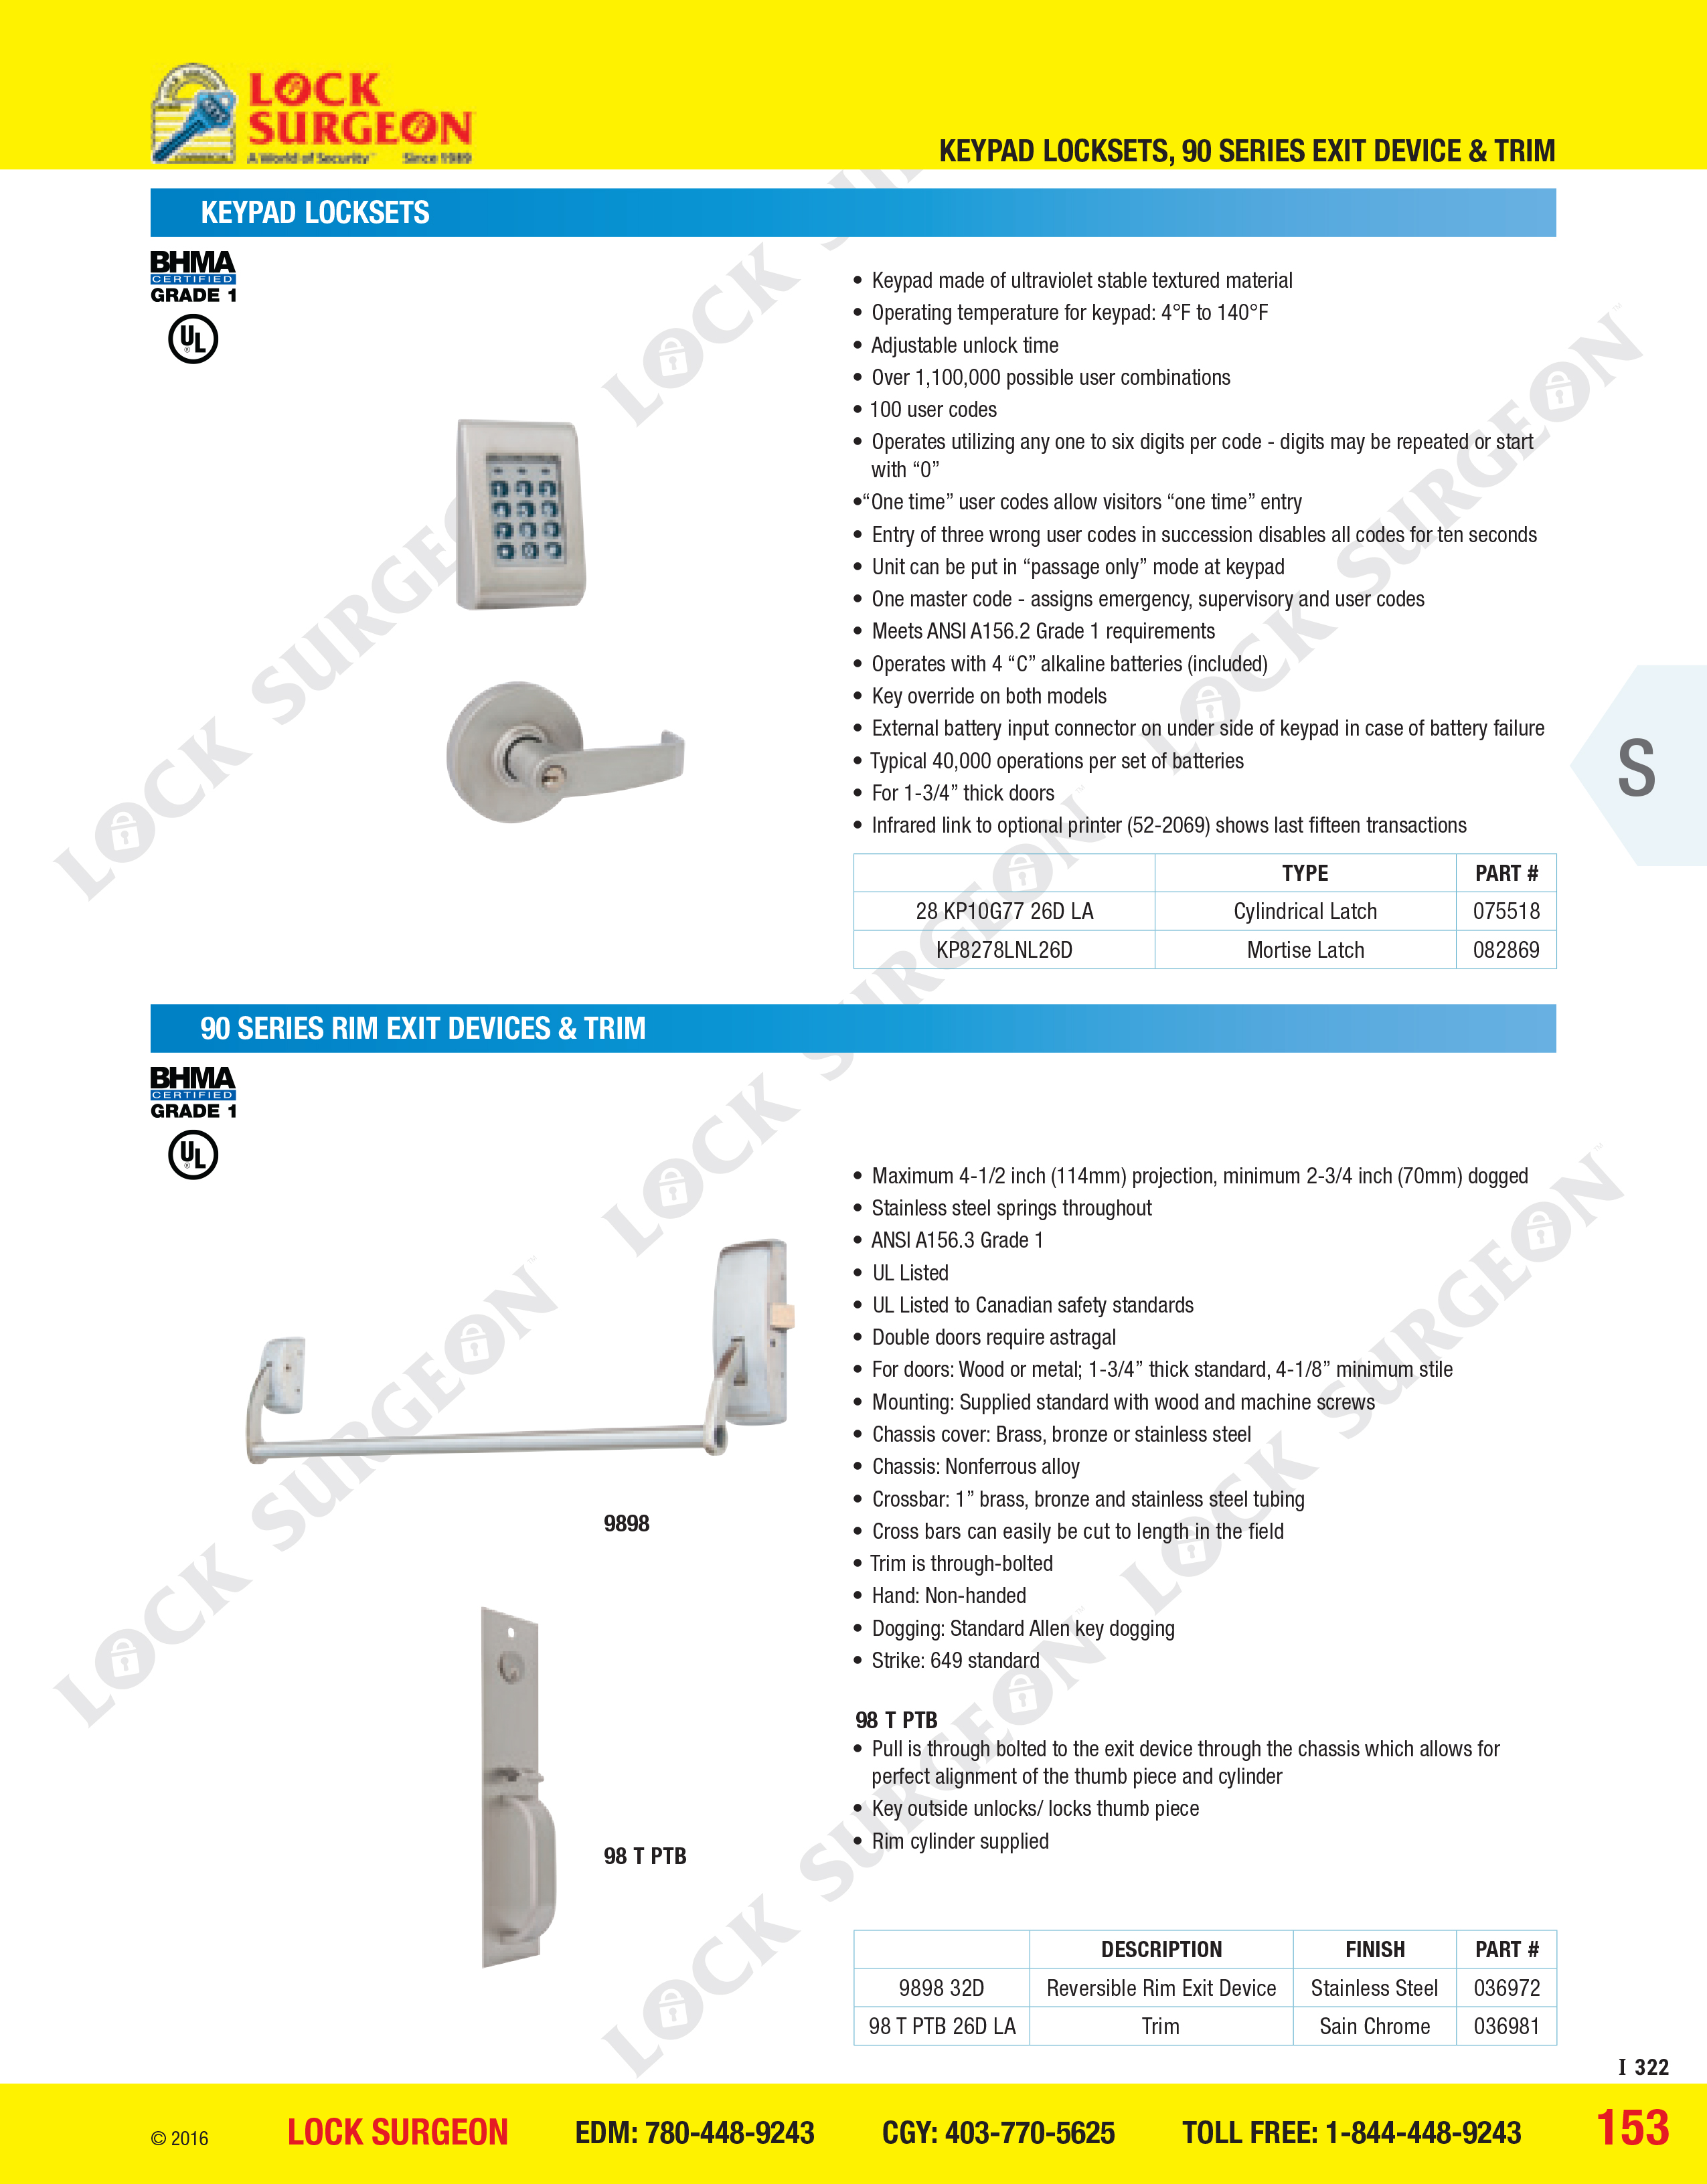 Sargent keypad locks and 90-series rim-exit device and trims.